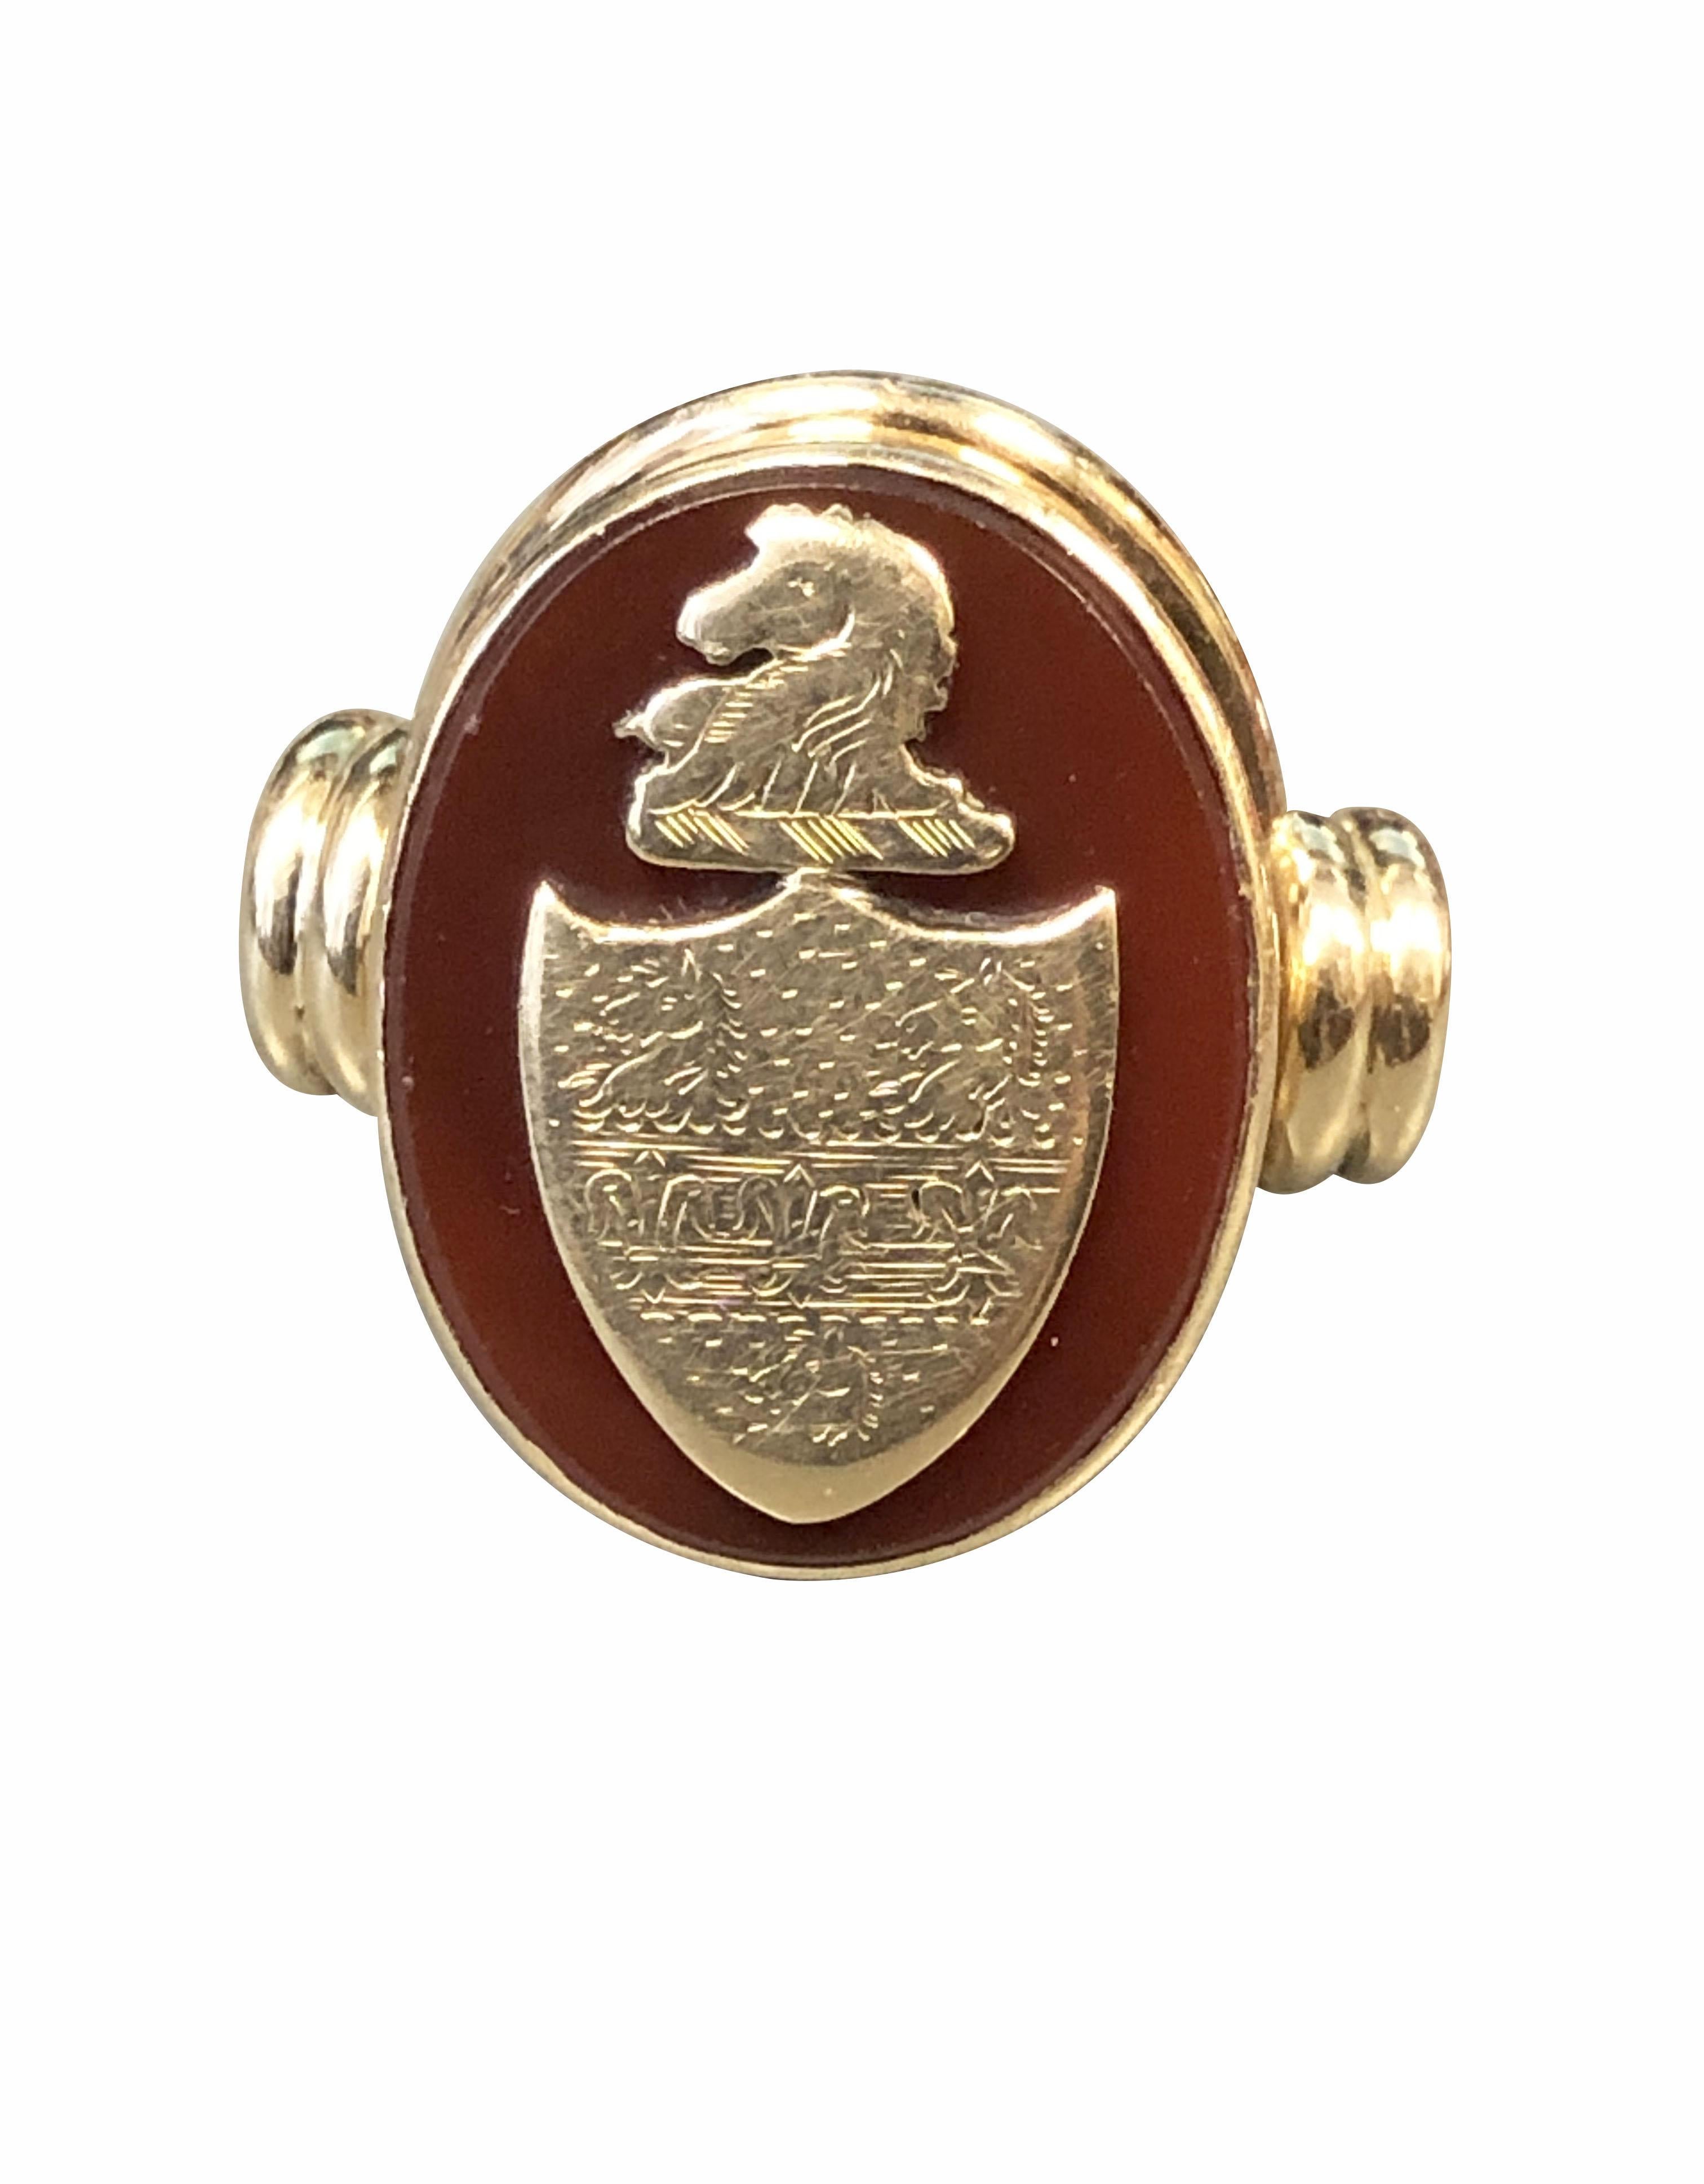 Circa 1900 14k Yellow Gold Signet Ring, the top measures 7/8 X 5/8 inch, set with a Carnelian stone with a Gold Signet Crest Shield attached on top, finger size 12 